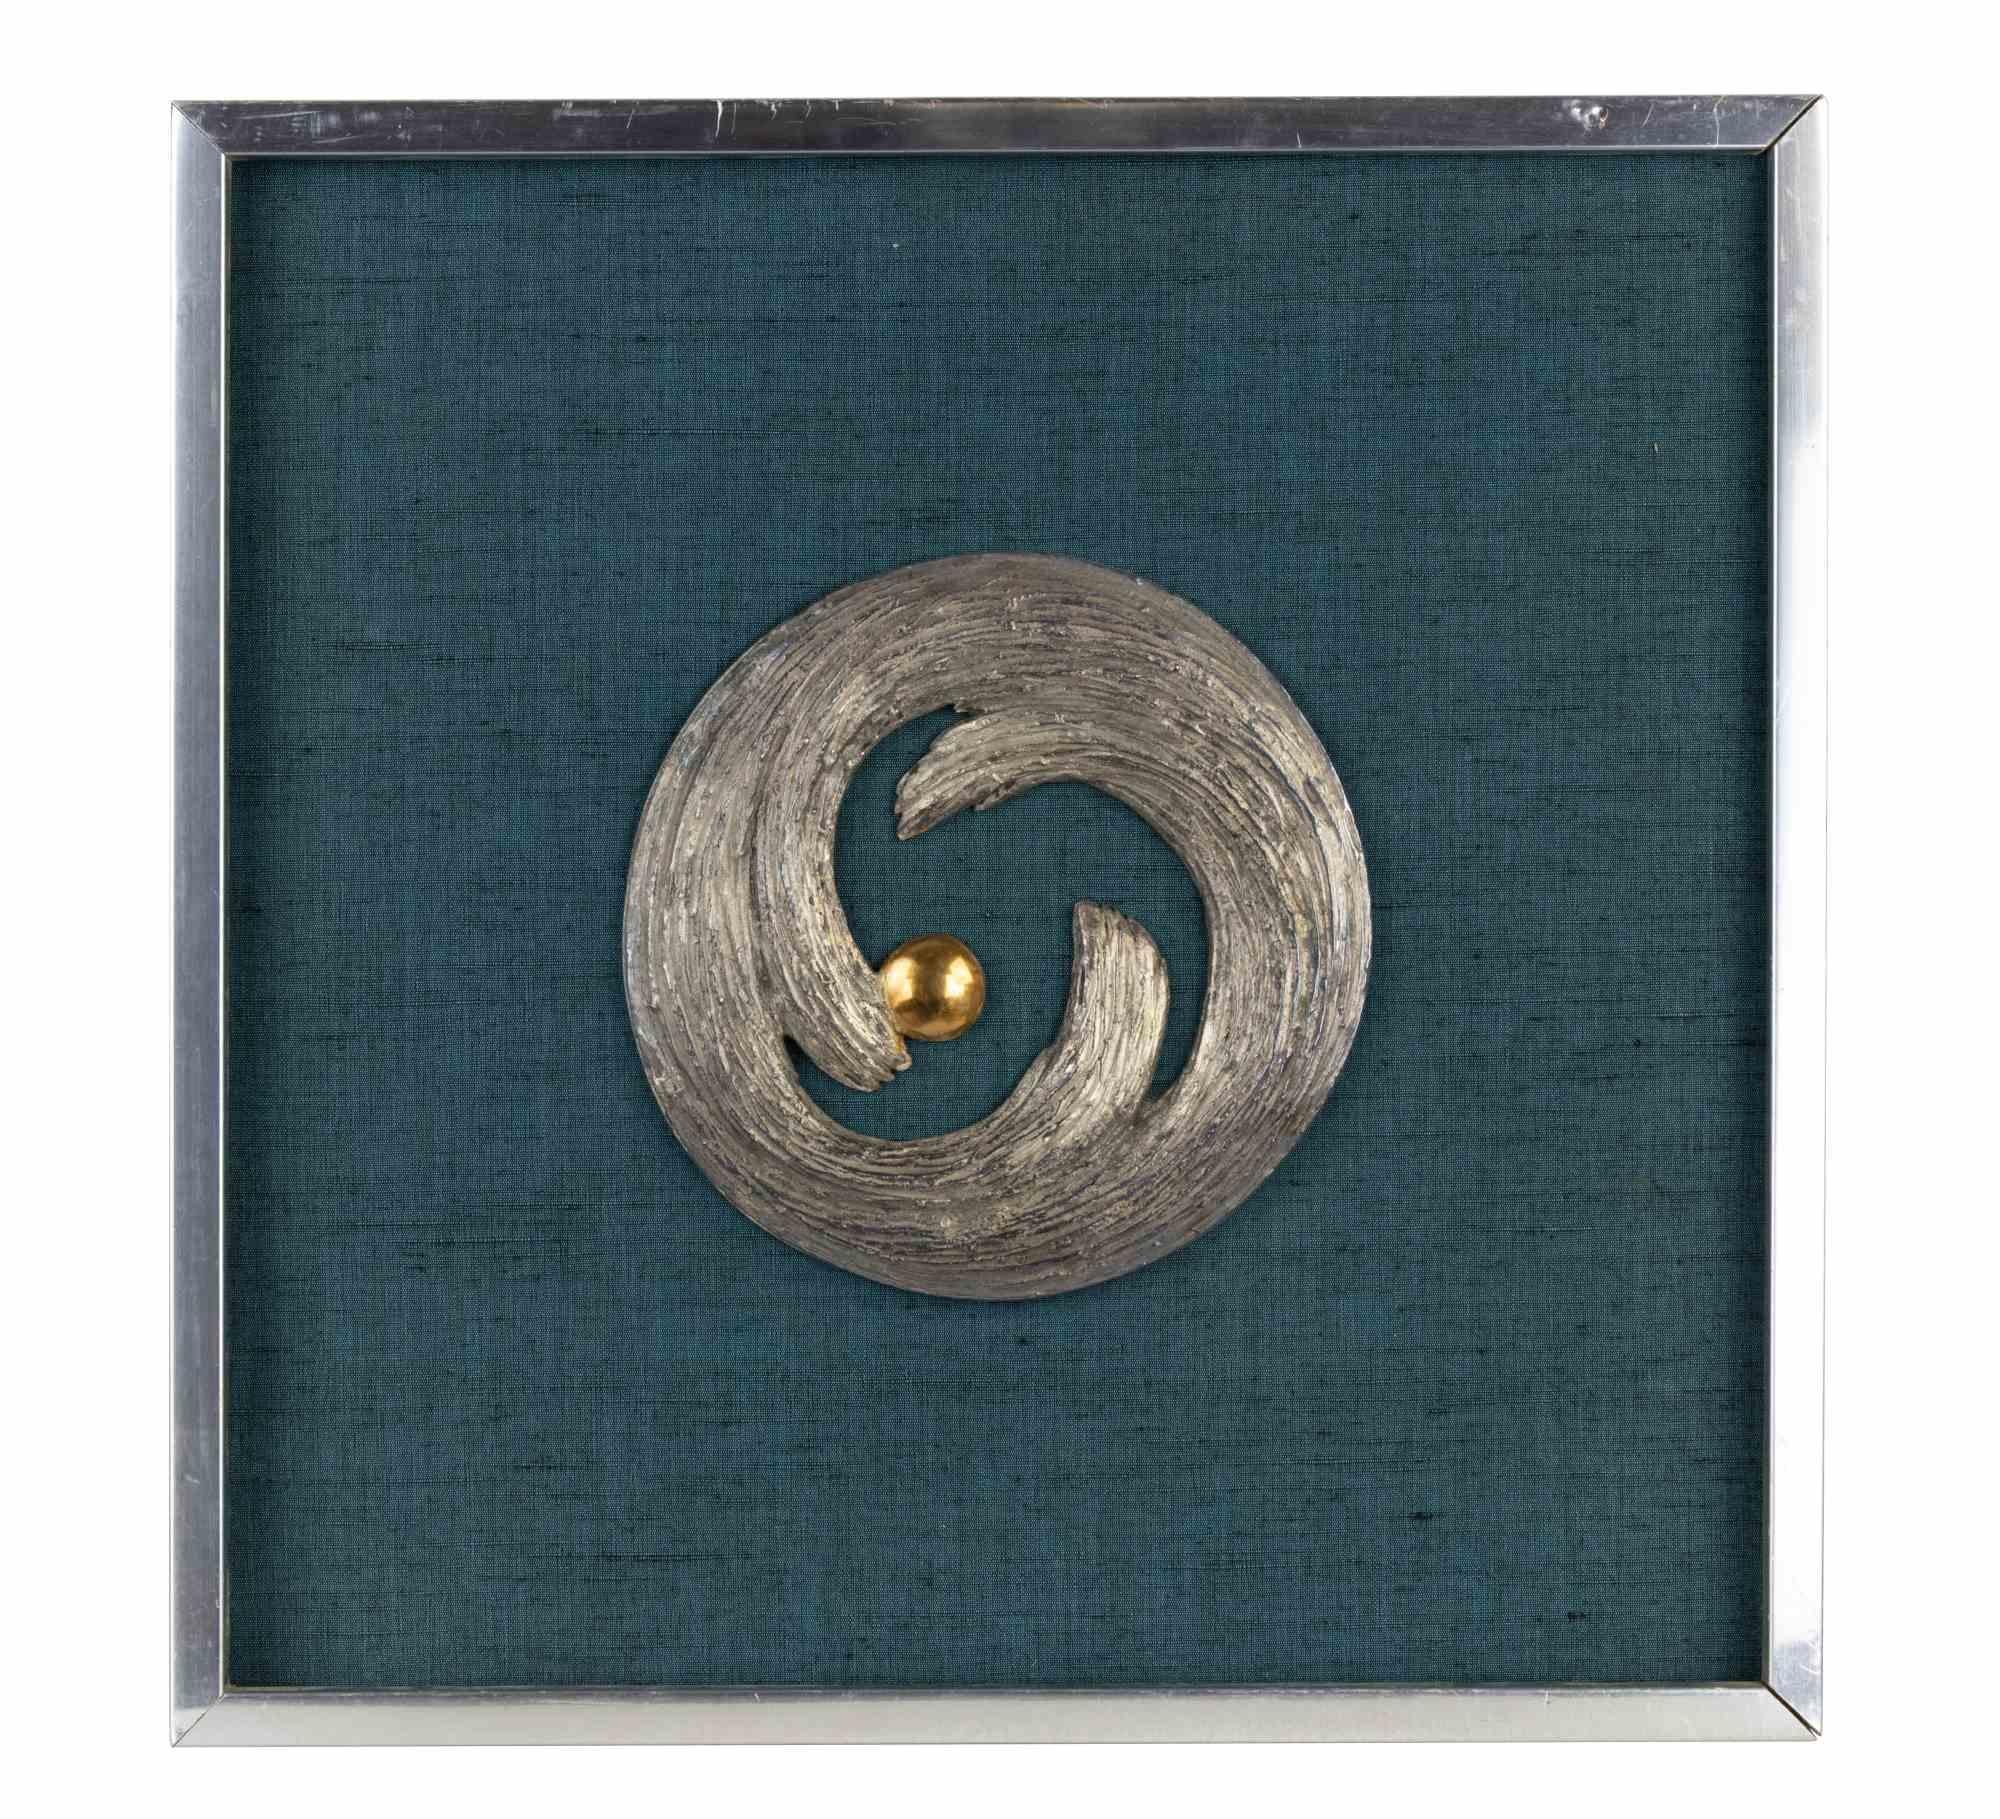 The circle of life is a contemporary artwork realized by Artist of the late 20th Century.

Bronze relief mounted on green background

Includes frame